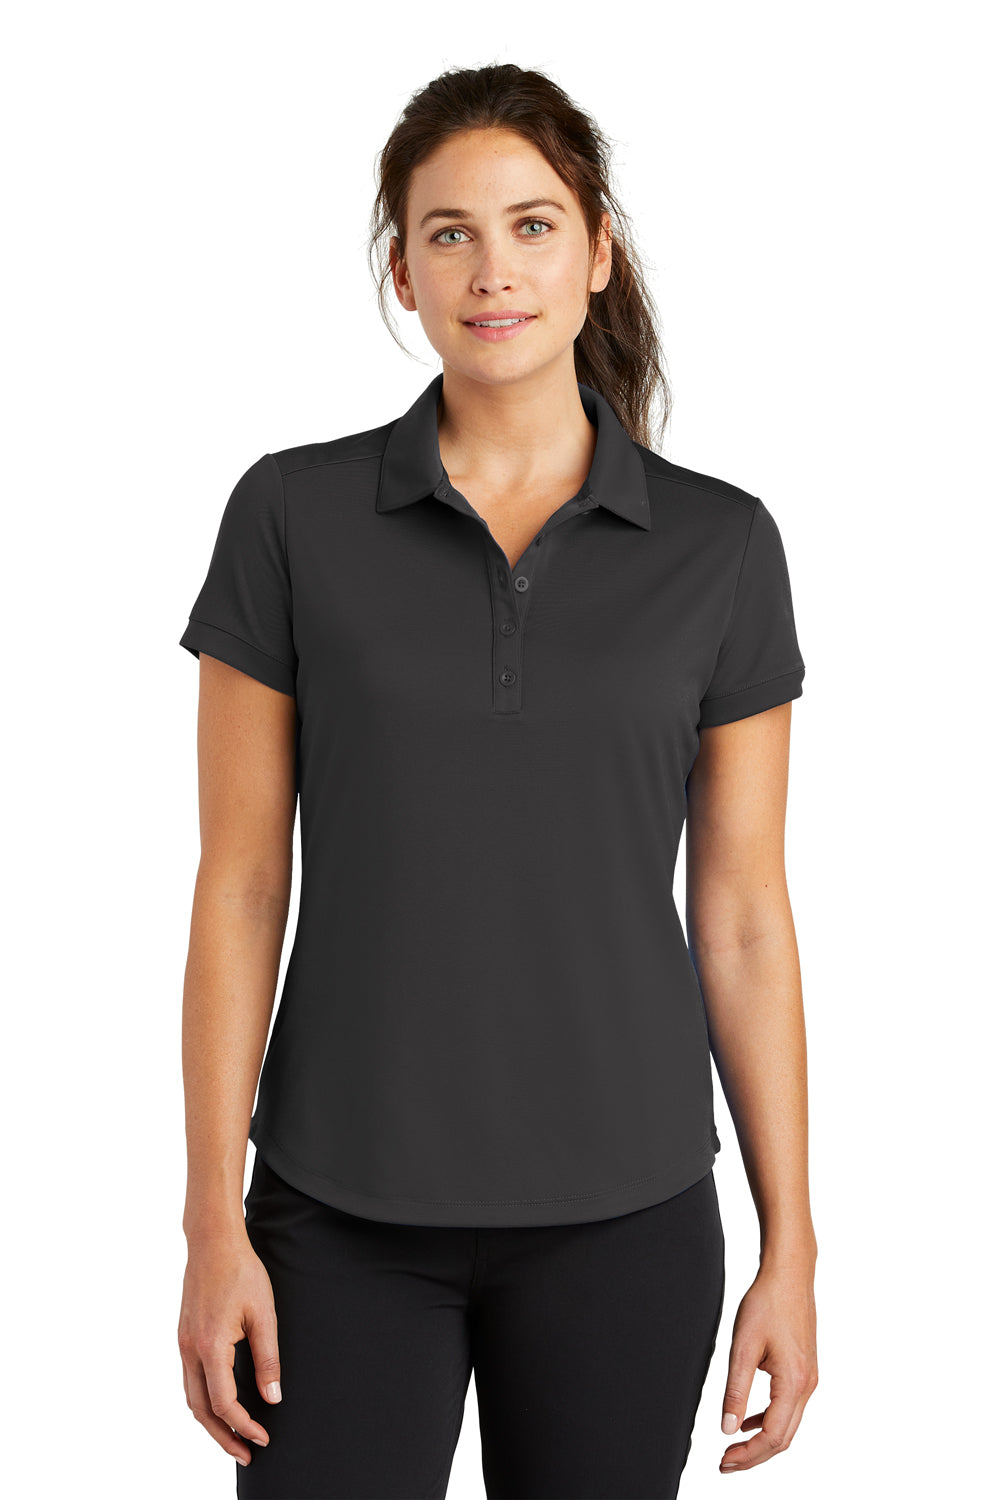 Nike 811807 Womens Players Dri-Fit Moisture Wicking Short Sleeve Polo Shirt Anthracite Grey Model Front